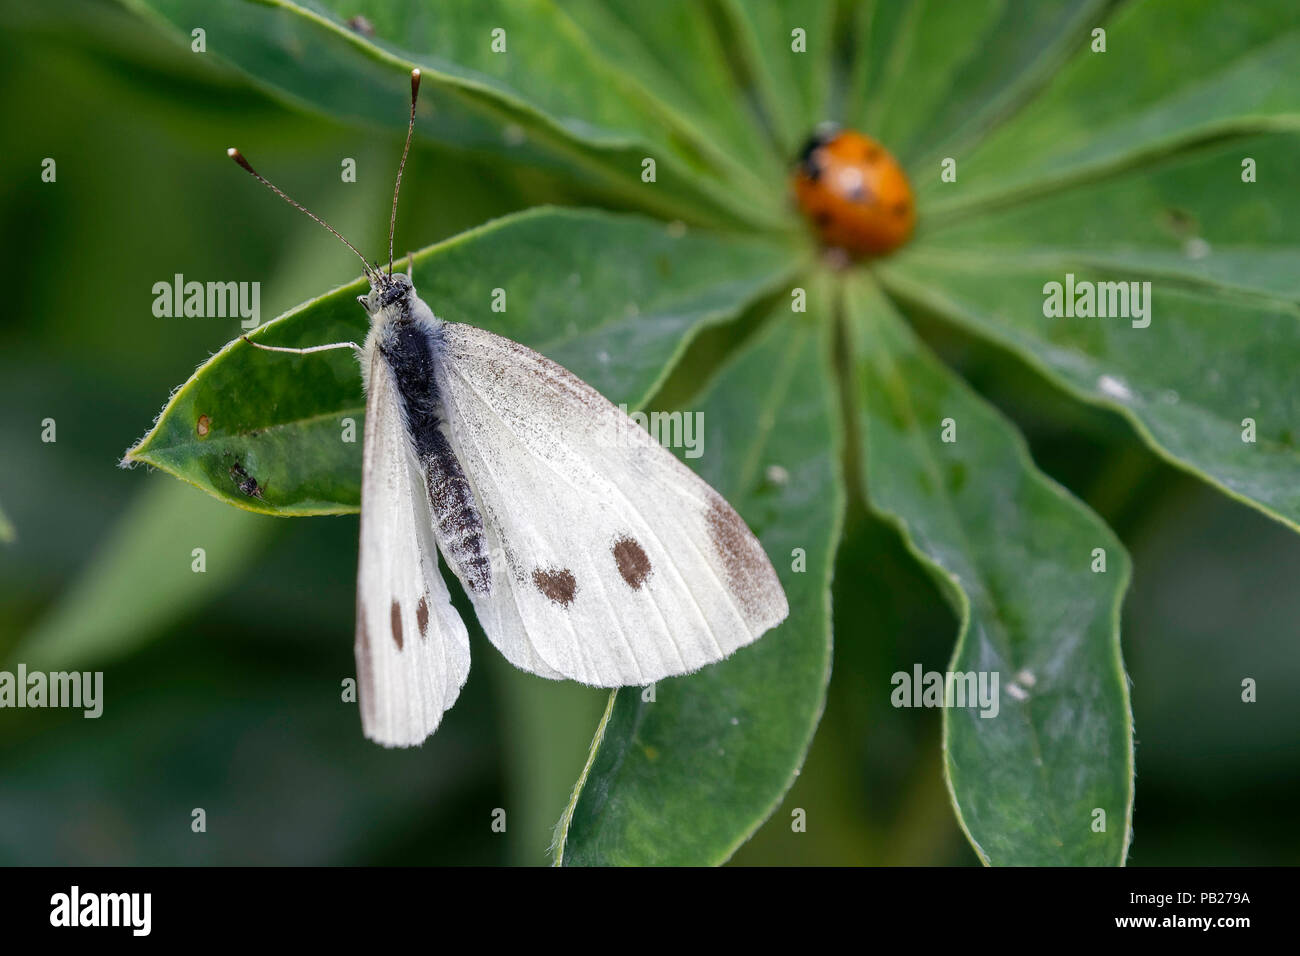 Female Large White butterfly resting on a lupin plant Stock Photo